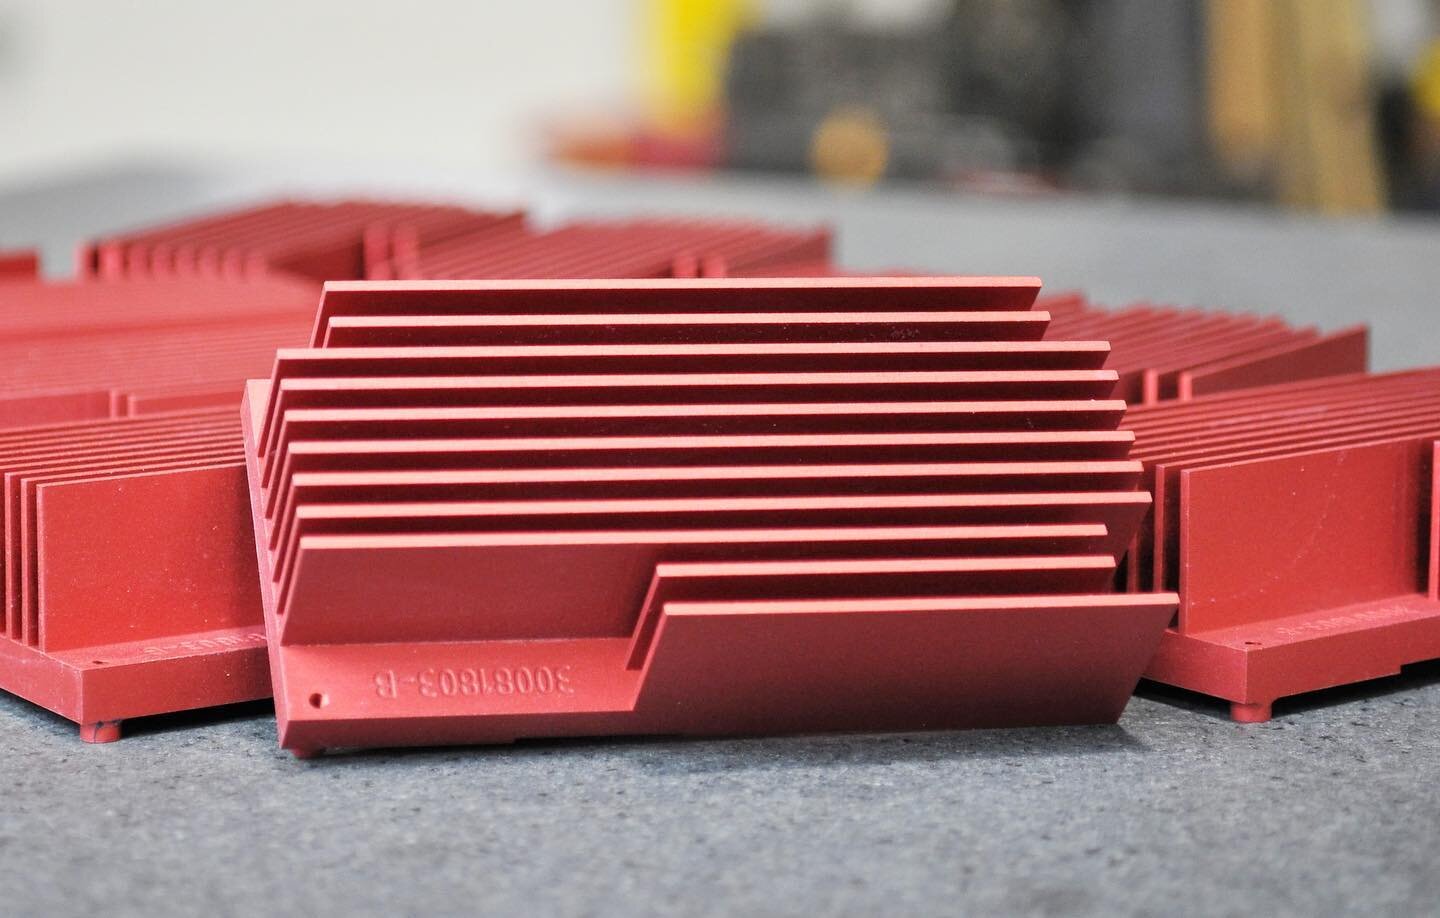 Sometimes I find things are cool not because they're fancy, simply because they're not what I see at the shop everyday.  These anodized heat sinks just came back from the platers and the red was a nice perk on a cold Monday at the shop.